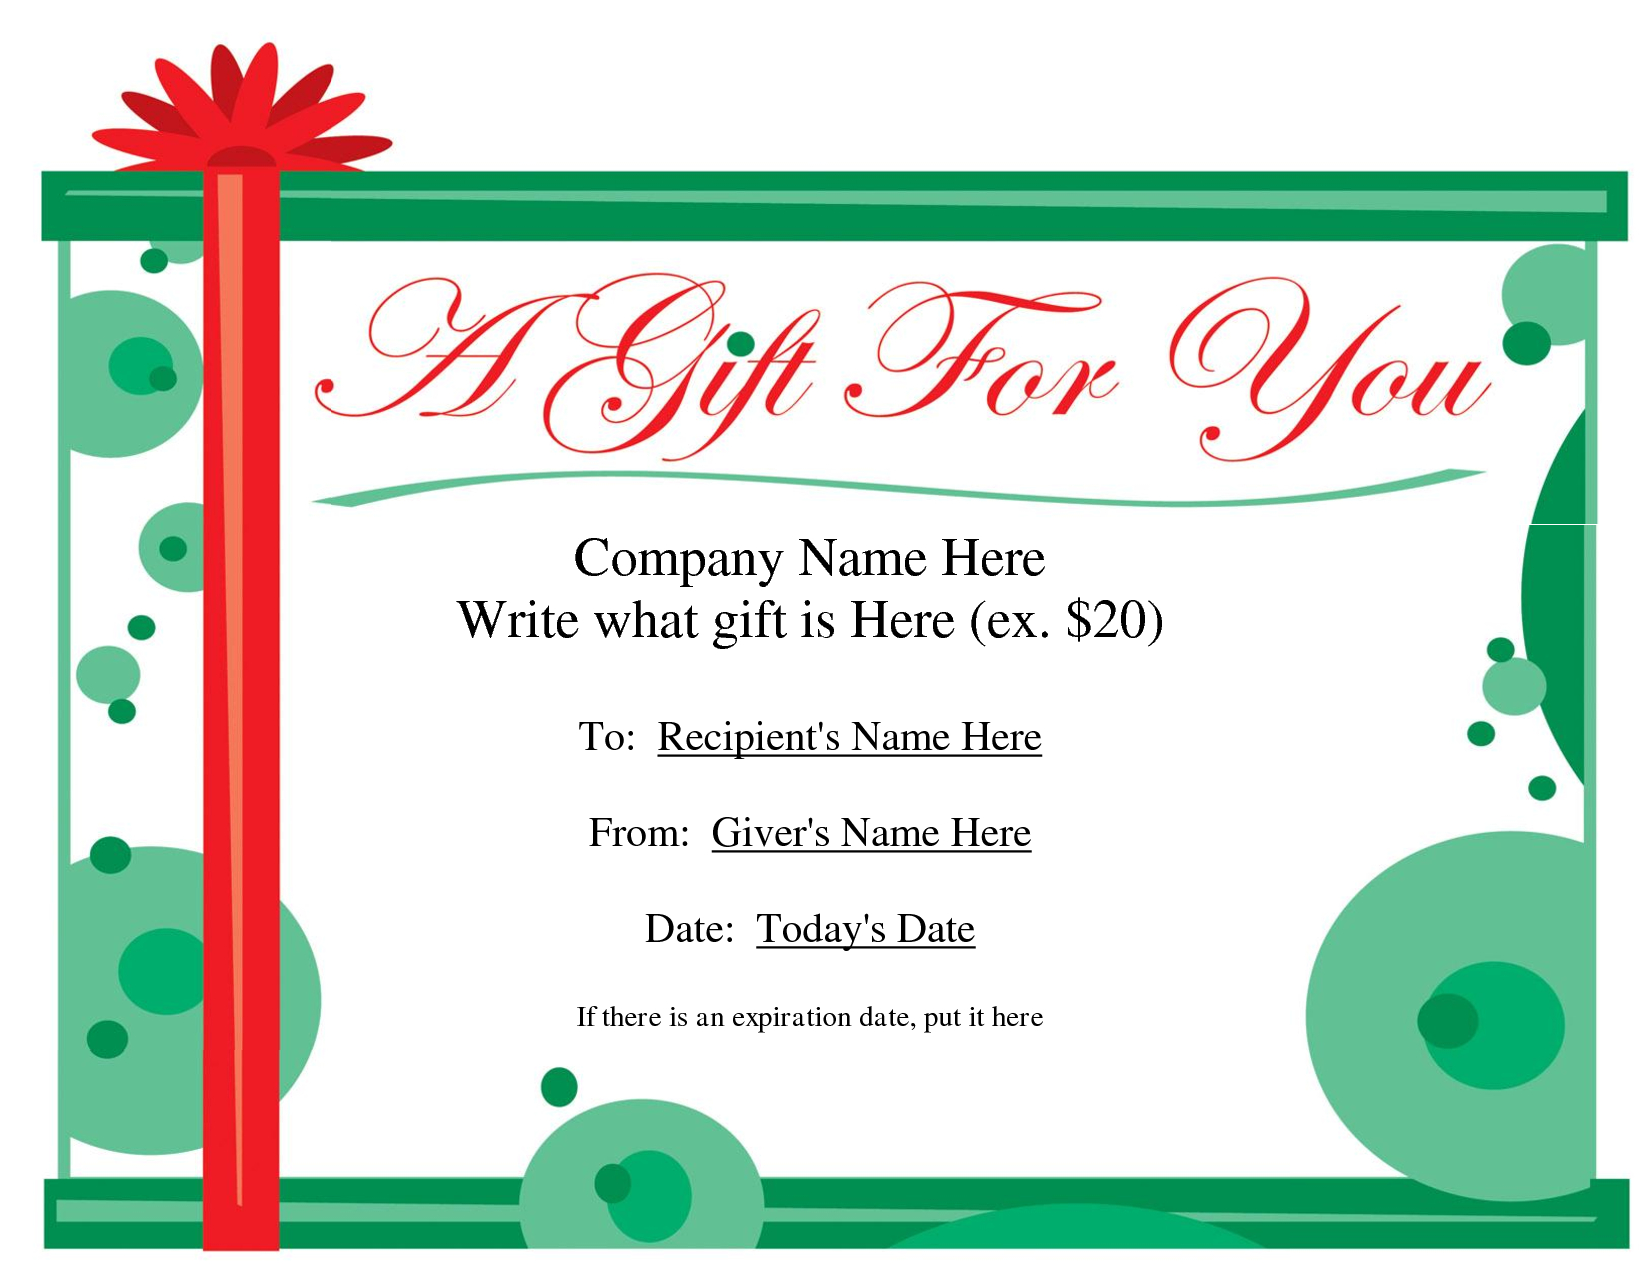 Professional Massage Gift Certificate Template Free Download